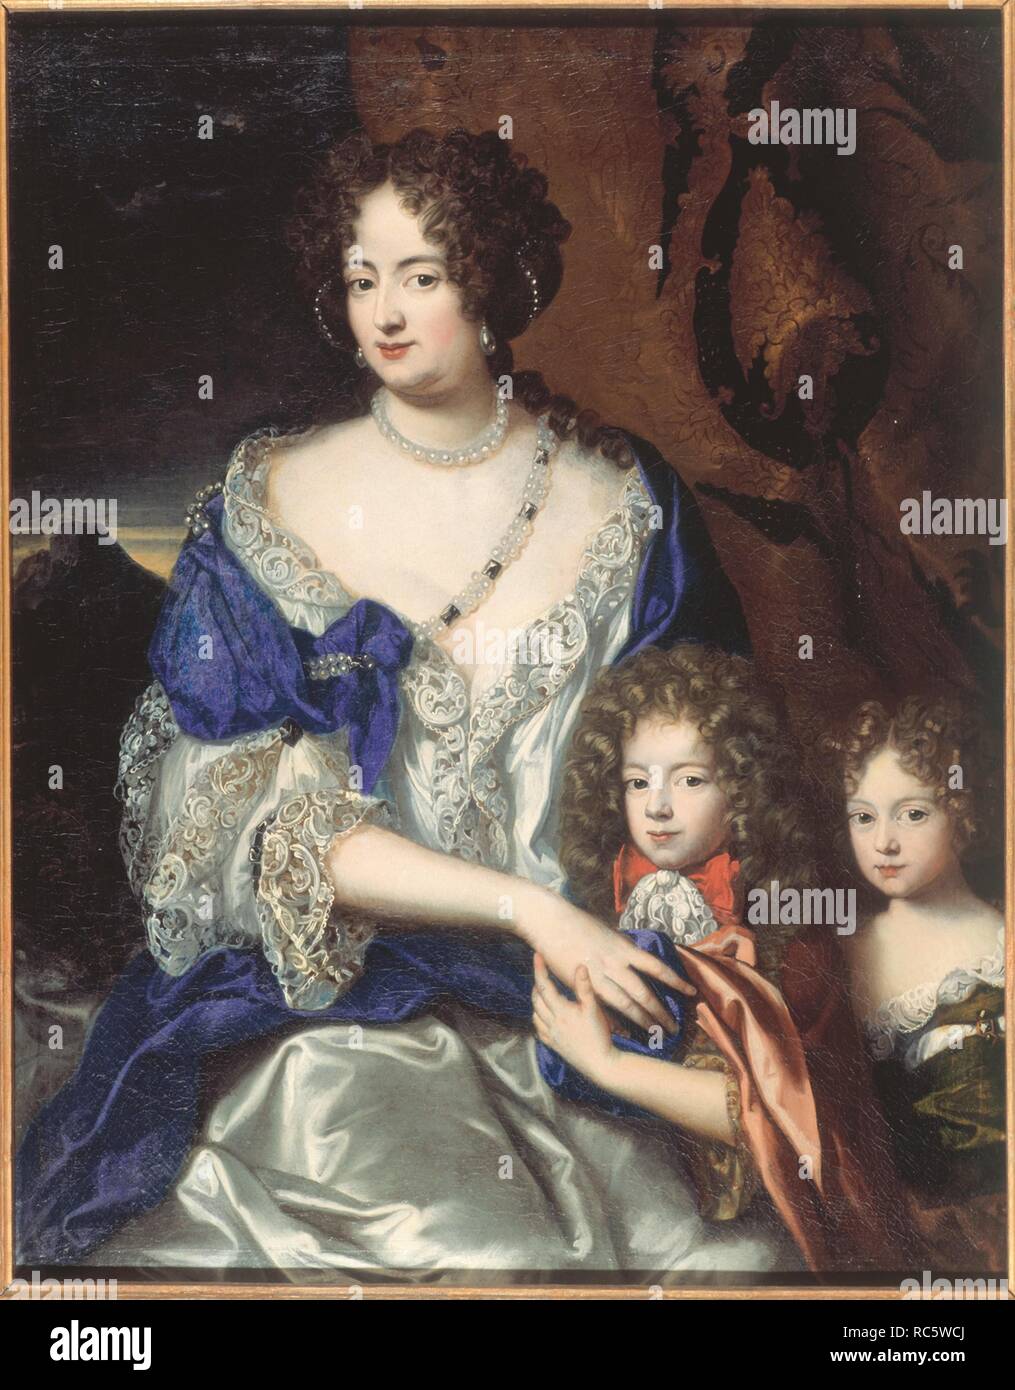 Duchess Sophia Dorothea of Brunswick and Luneburg with her children George and Sophia Dorothea. Museum: Bomann Museum Celle. Author: JACQUES VAILLANT. Stock Photo